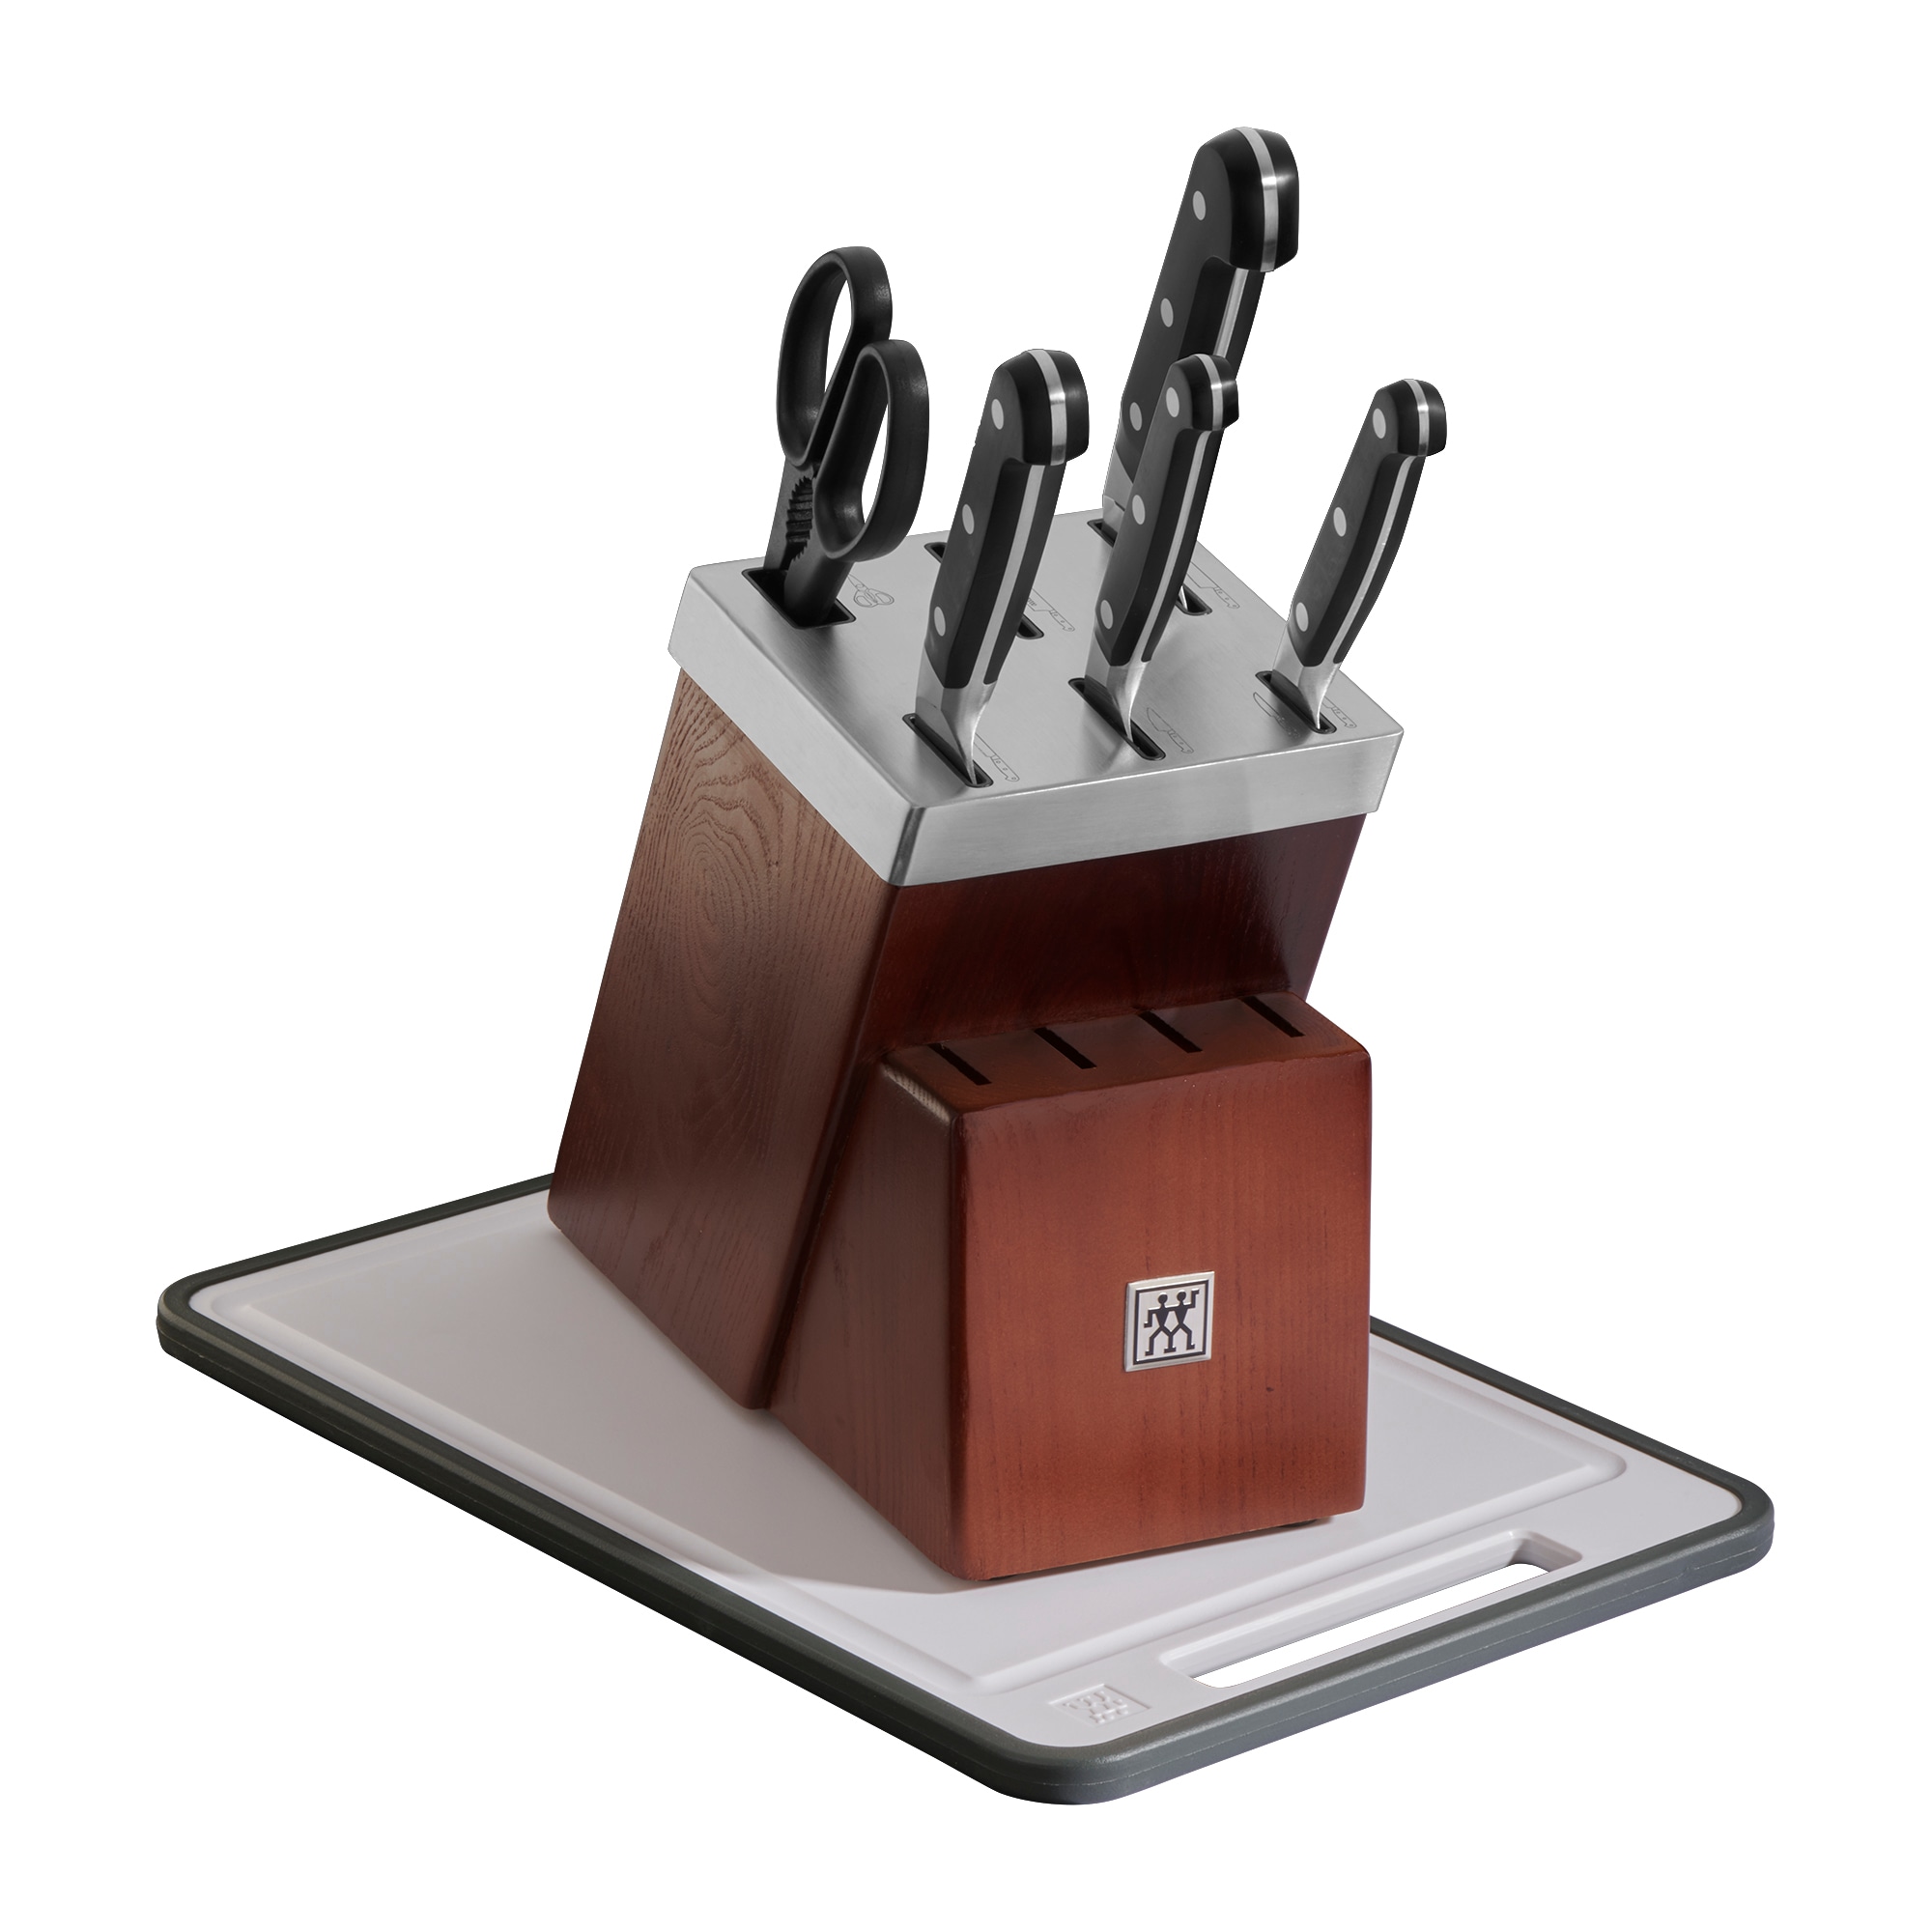 Zwilling ZWILLING Pro 7-pc Self-Sharpening Knife Block Set - Dishwasher Safe  - Curved Bolster - High-Carbon Stainless Steel - Made in Germany in the  Cutlery department at